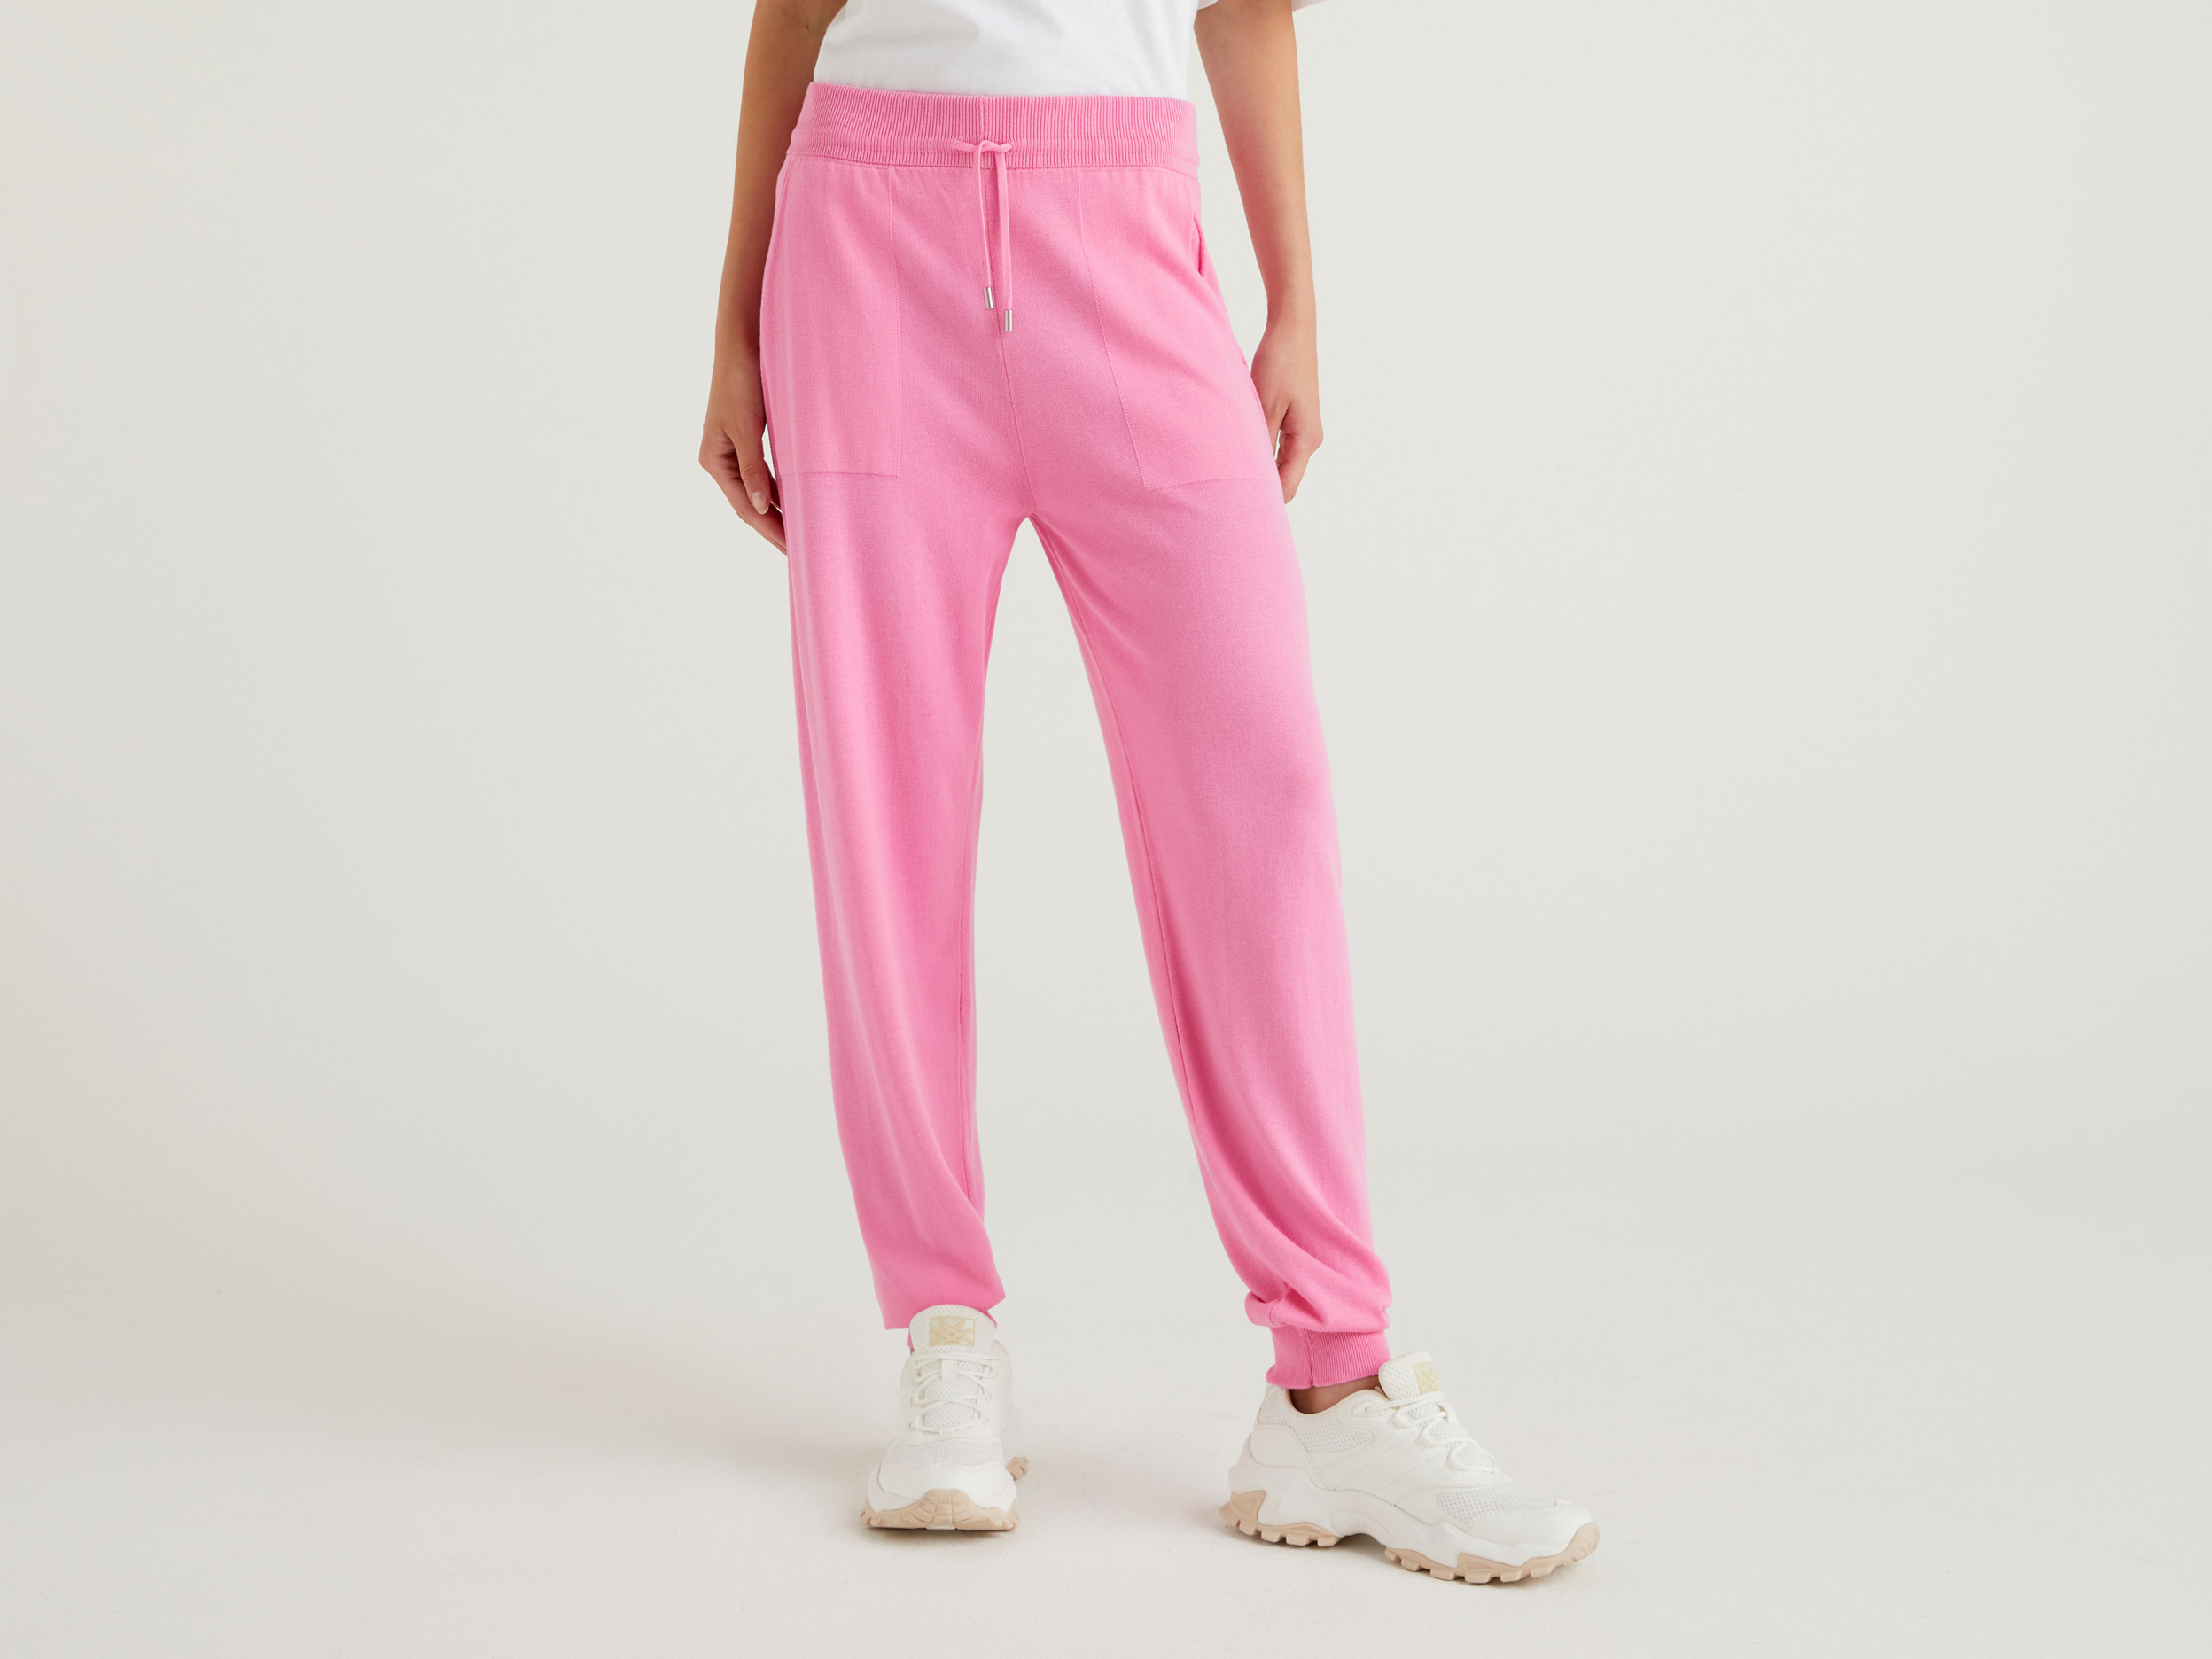 benetton, tricot trousers with drawstring, size xs, pink, women